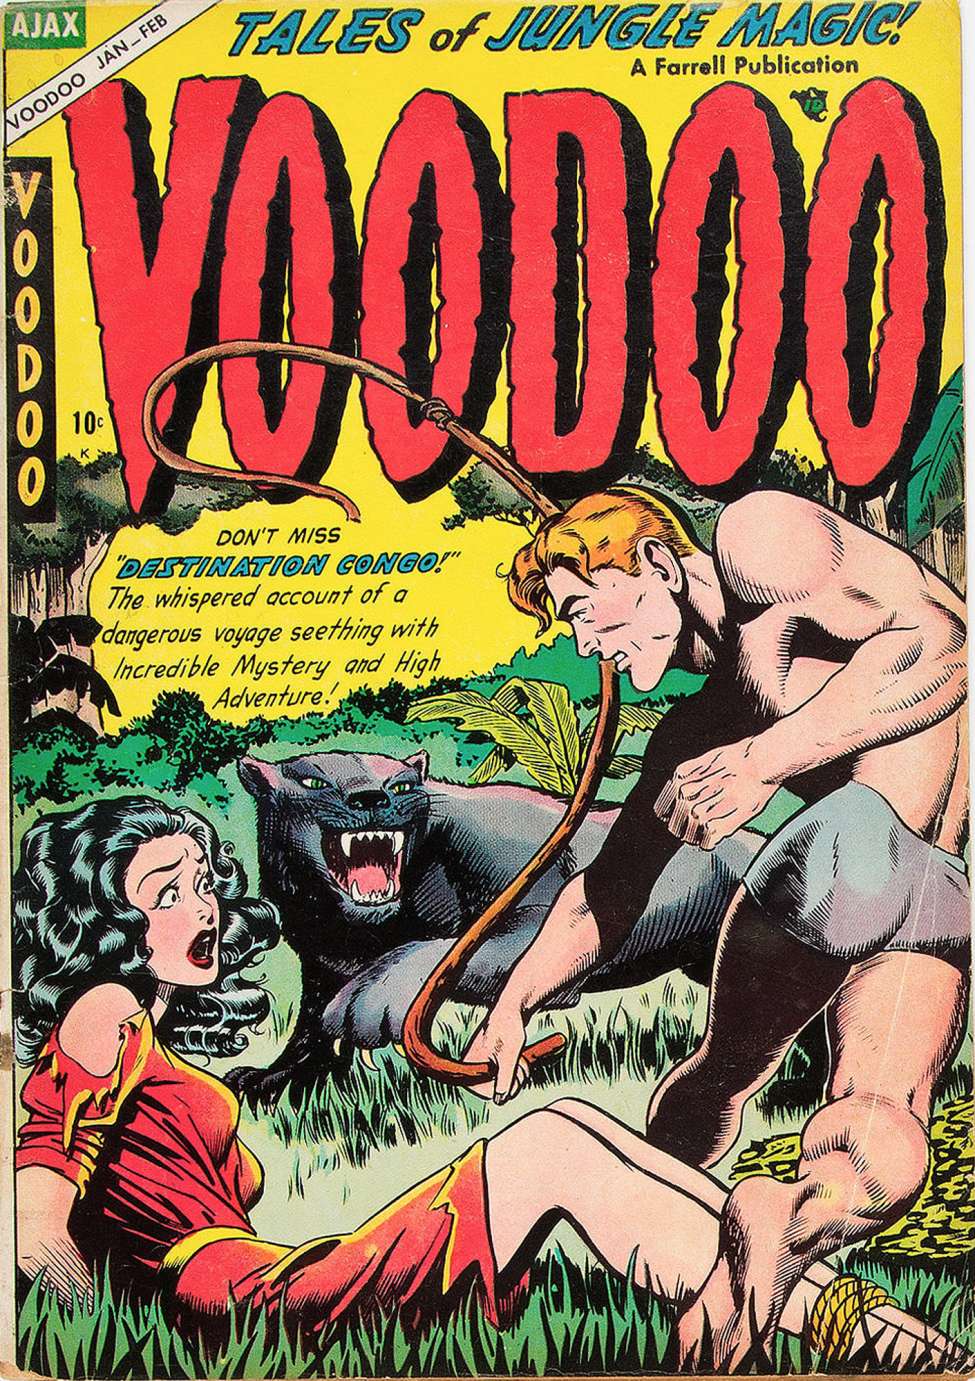 Book Cover For Voodoo 19 - Version 1